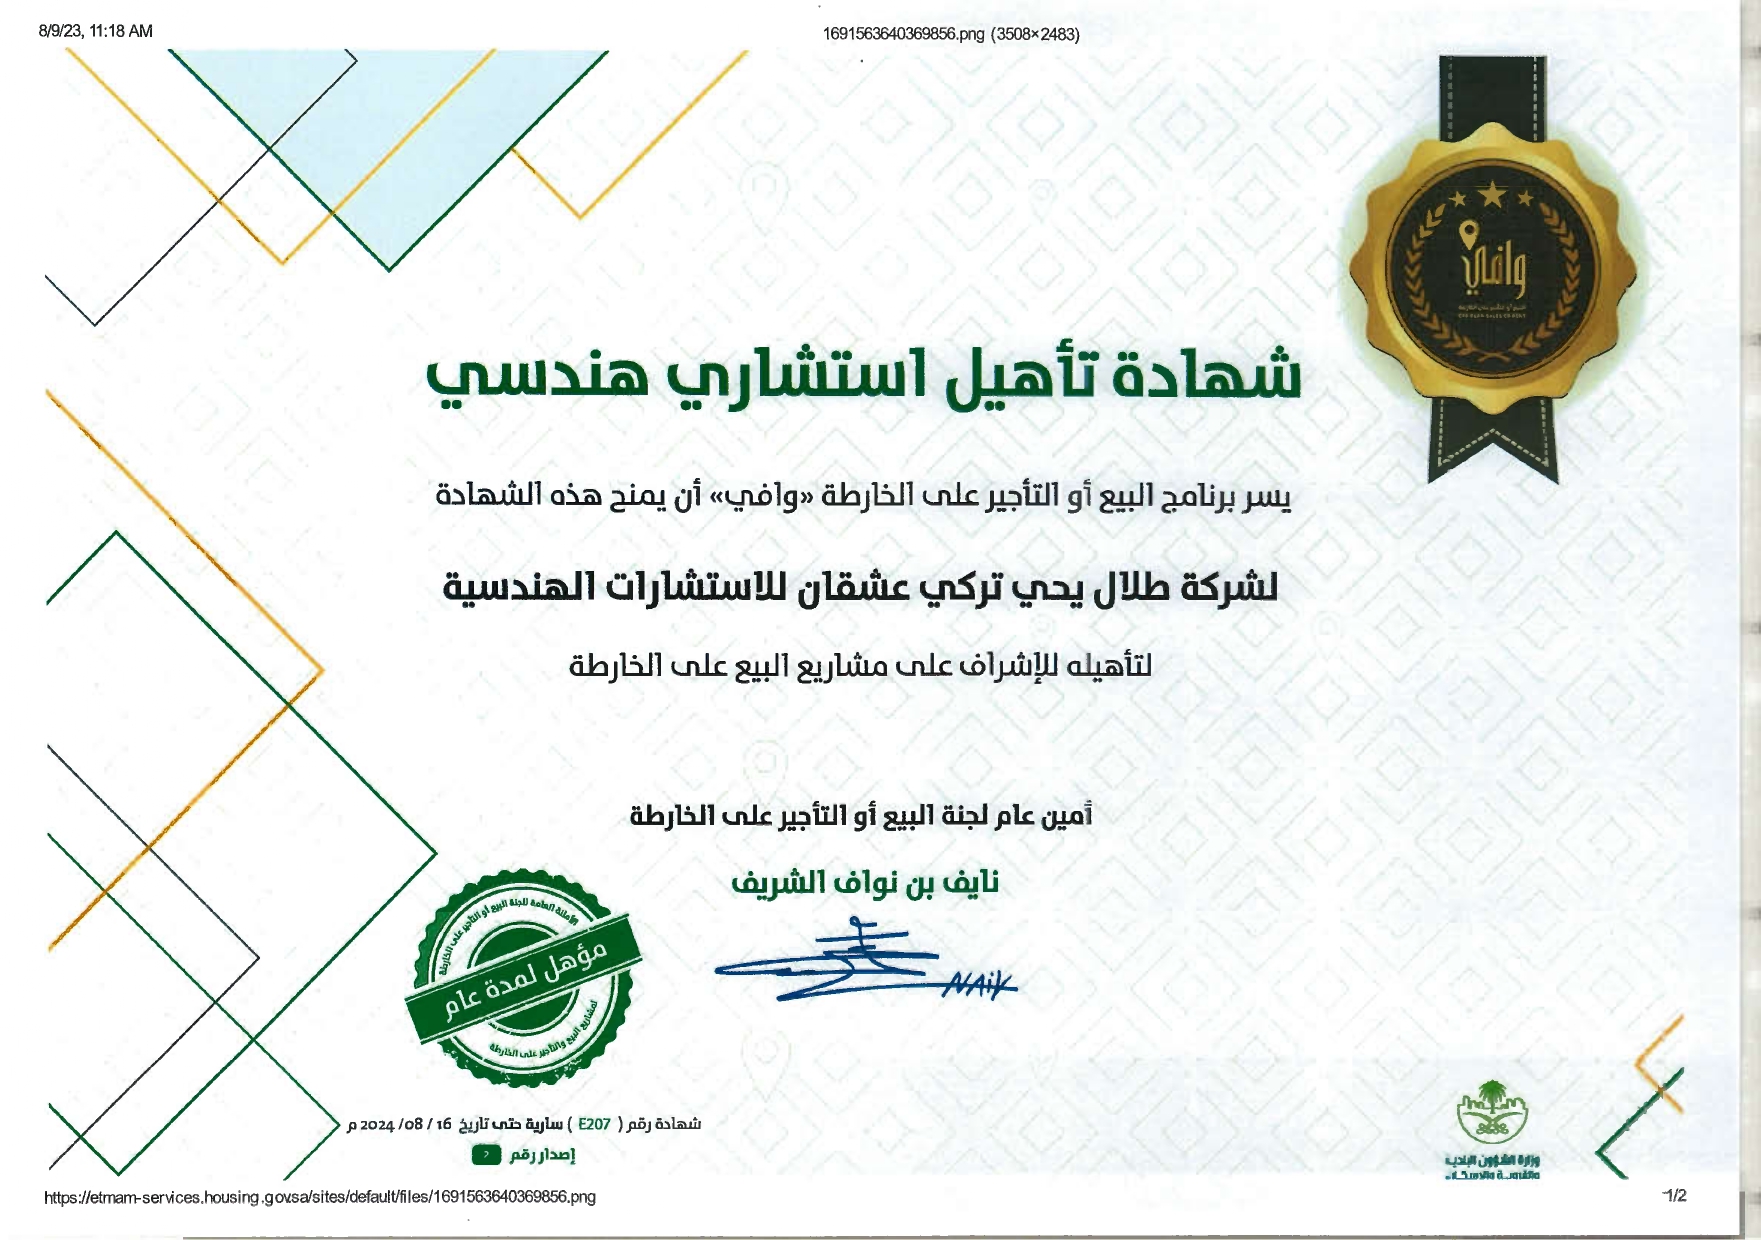  engineering office qualification certificate from Wafi, licenses and qualifications